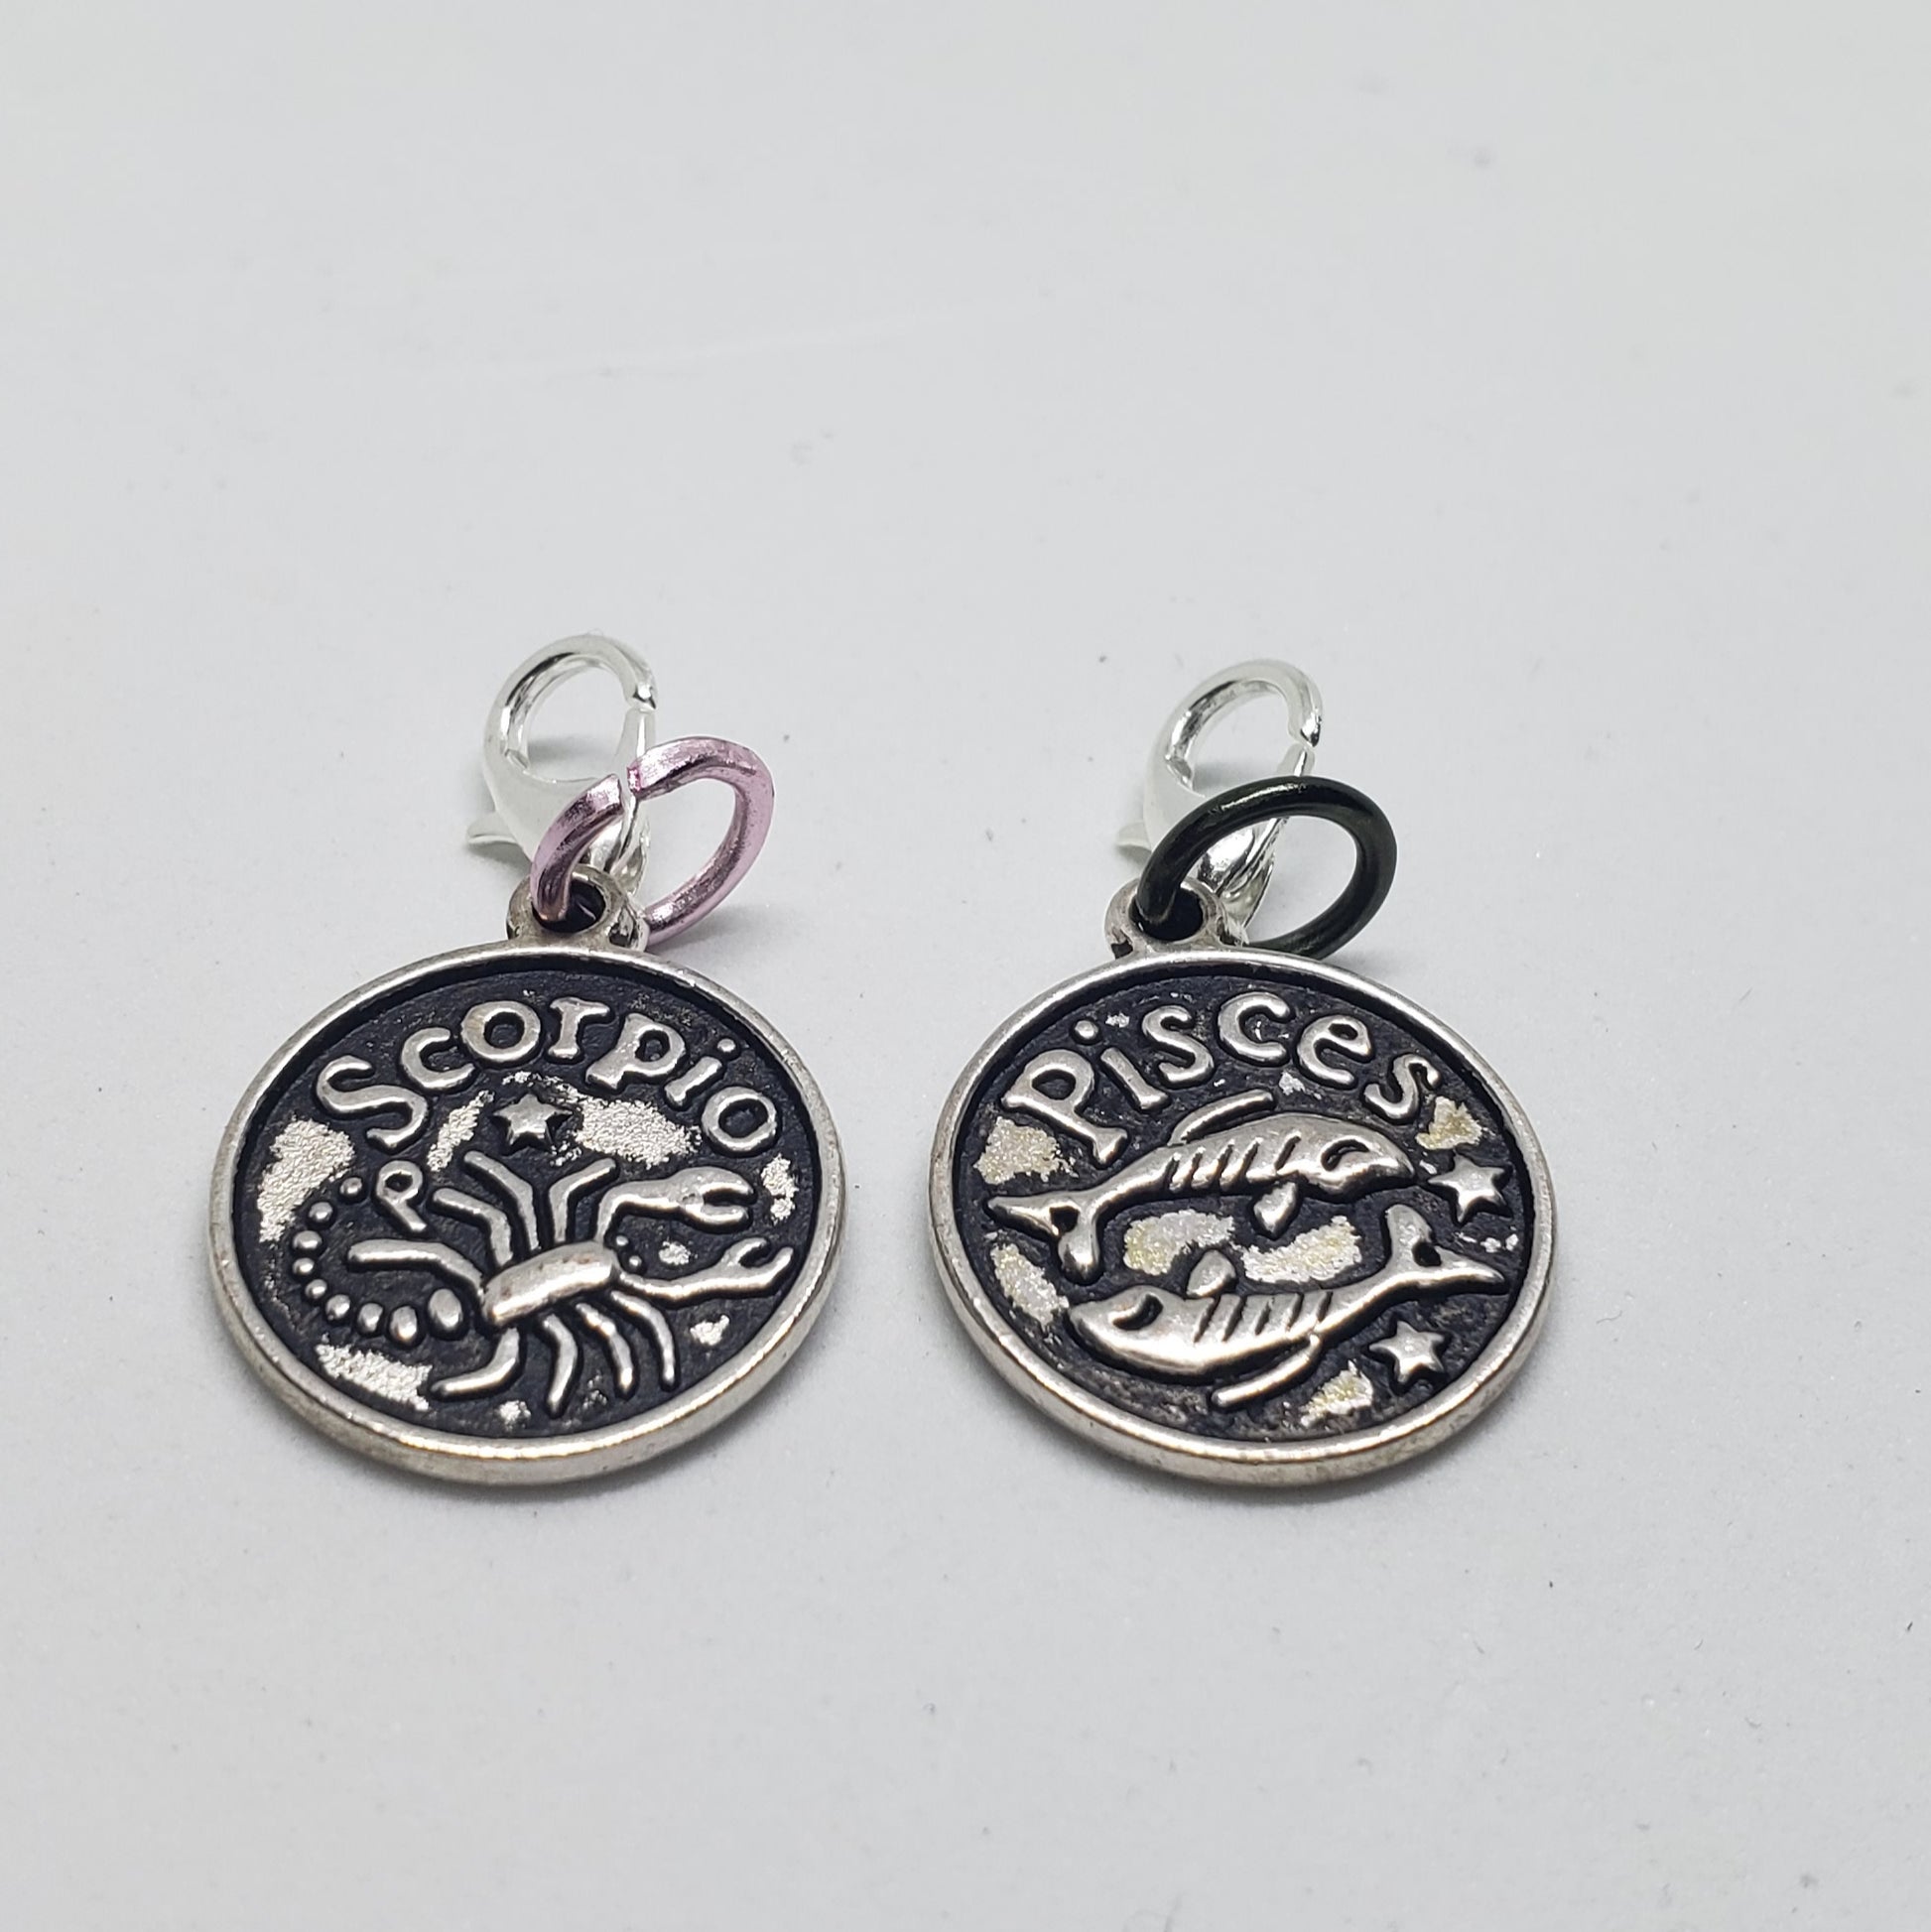 Zodiac Charms for Crochet and Knitting Projects